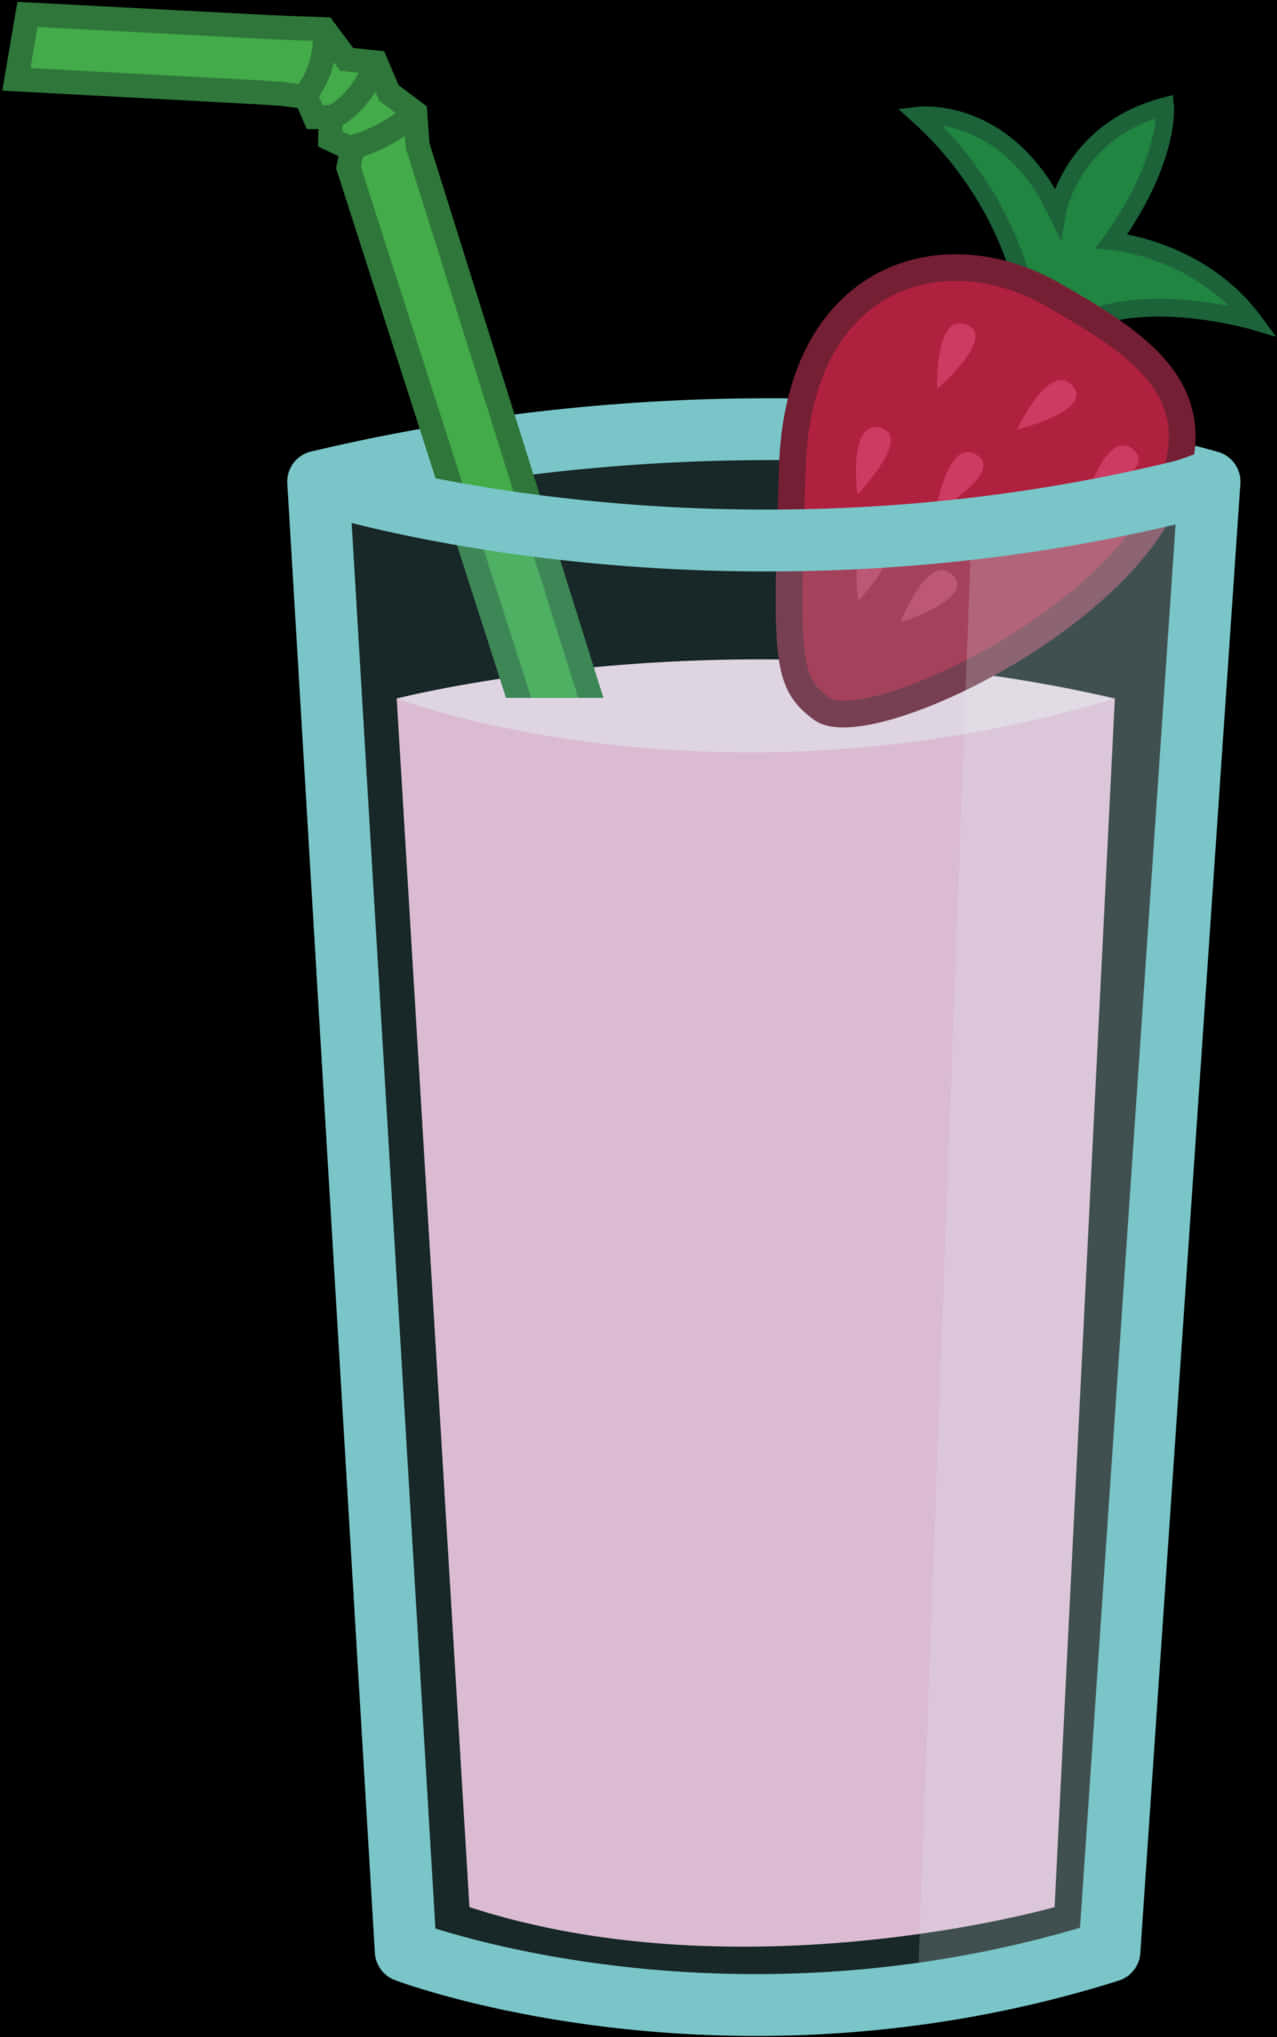 Download Strawberry Smoothie Cartoon Illustration | Wallpapers.com